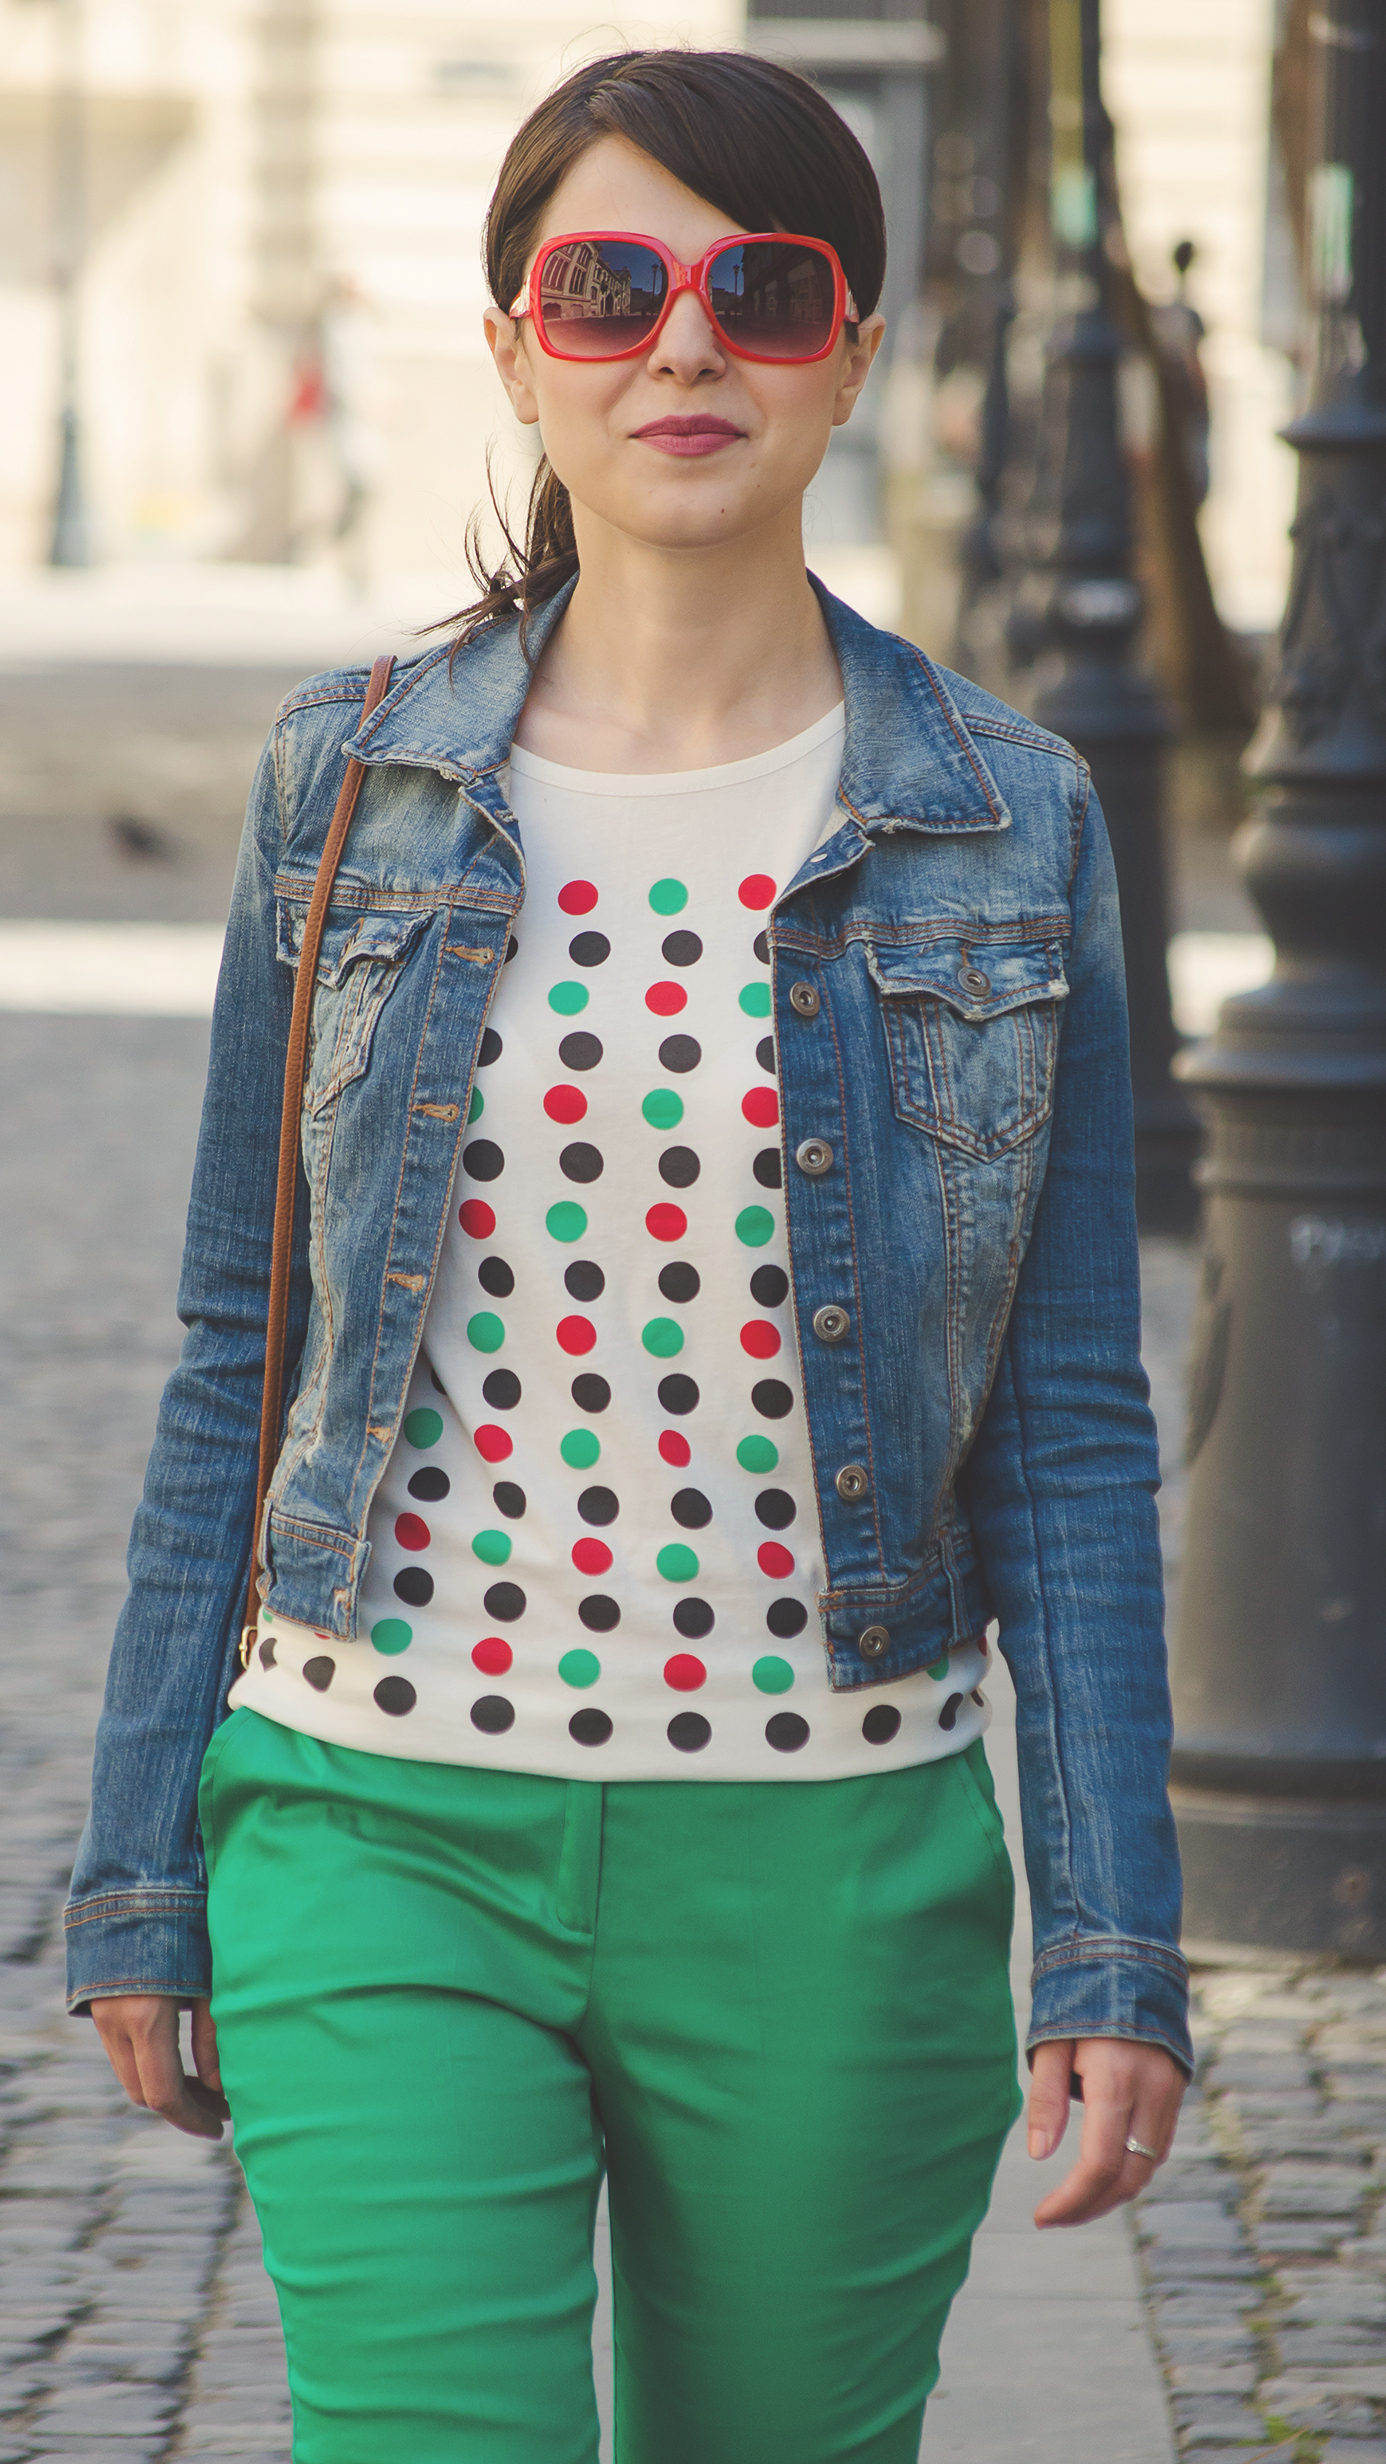 dotted t-shirt colourful dots ankle cut green pants converse sneakers jeans jacket Stradivarius brown h&m satchel bag red sunglasses 